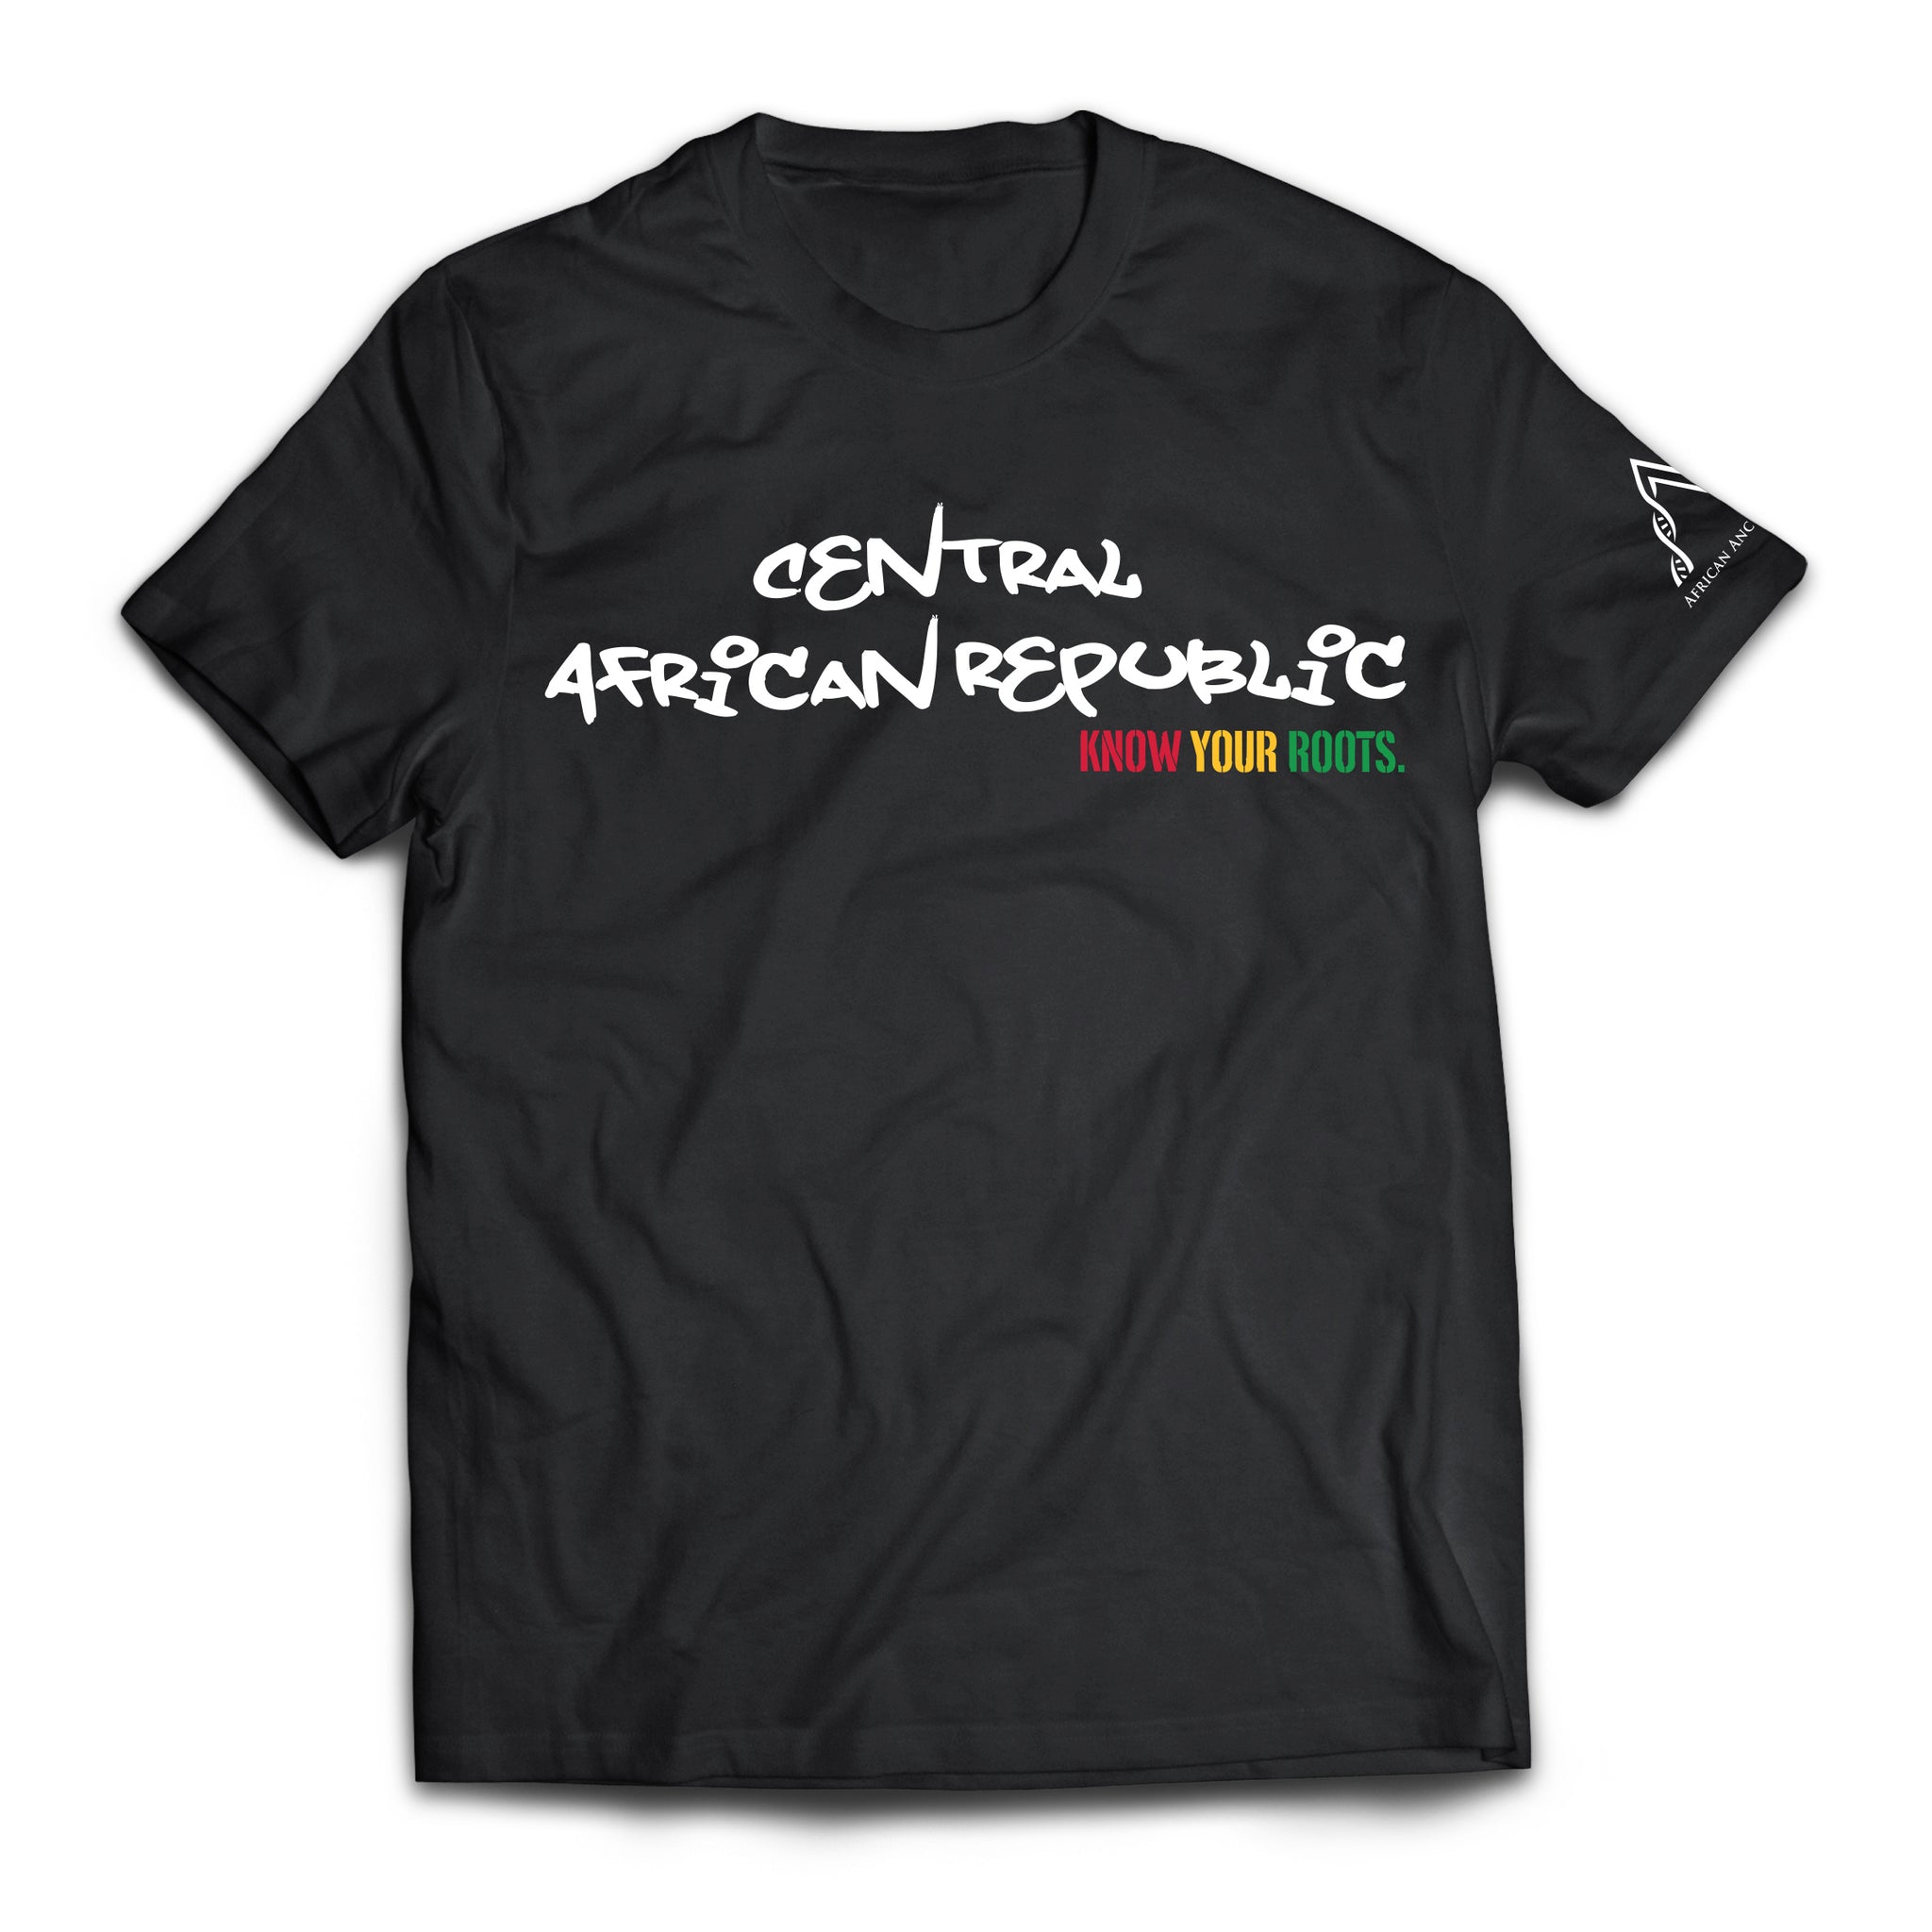  Central African Republic T-Shirt - "Know Your Roots" | African Ancestry